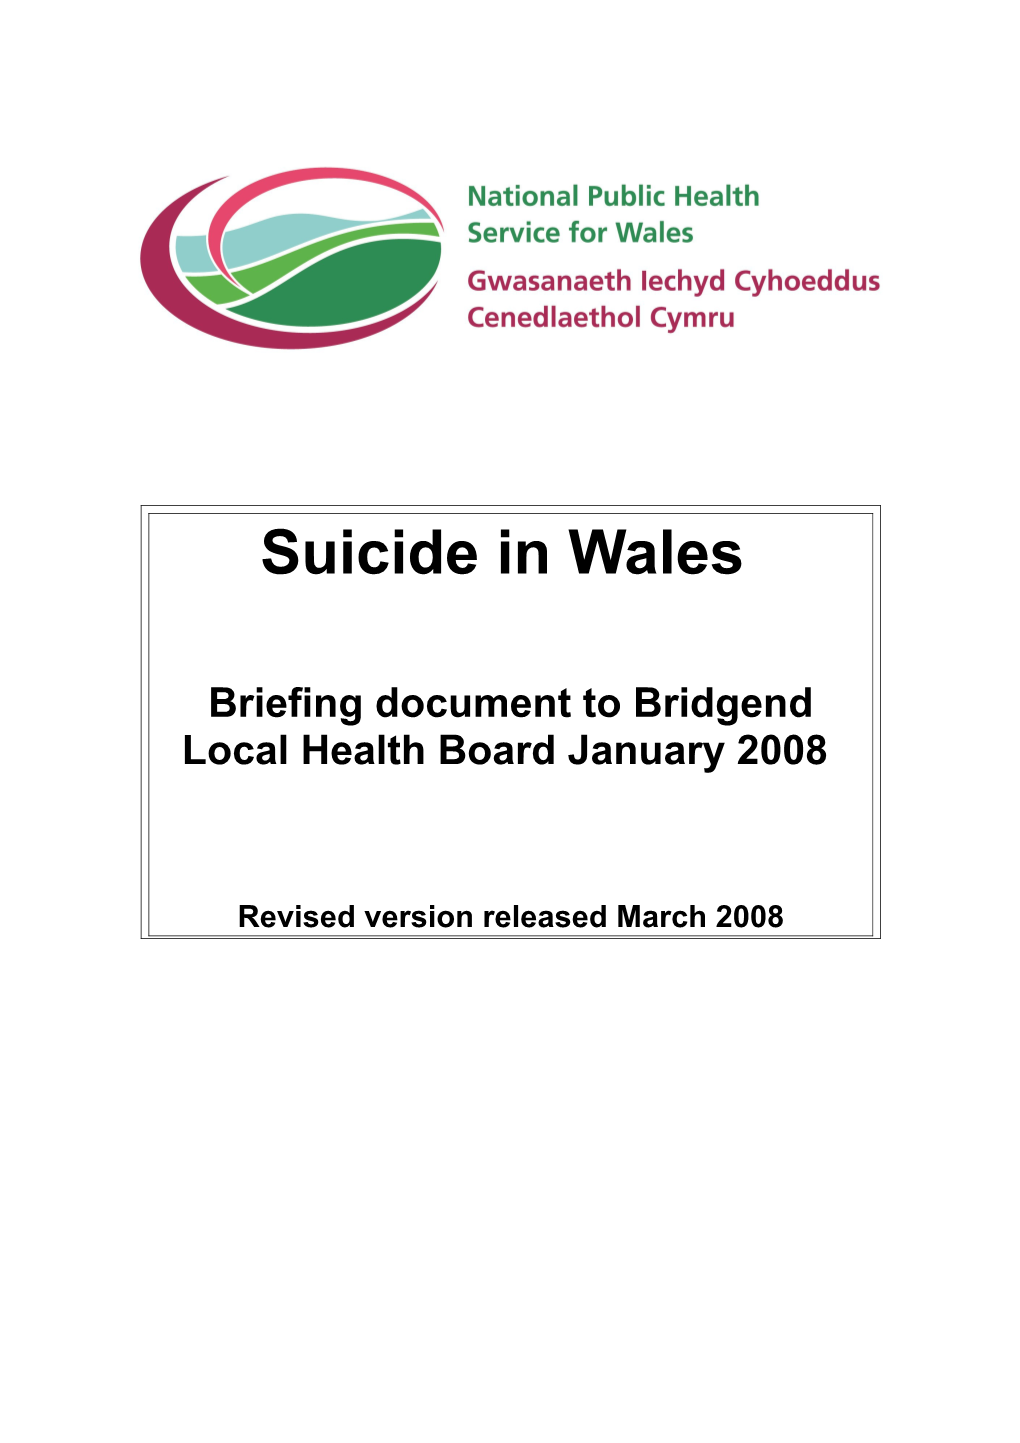 Briefing Document to Bridgend Local Health Board January 2008